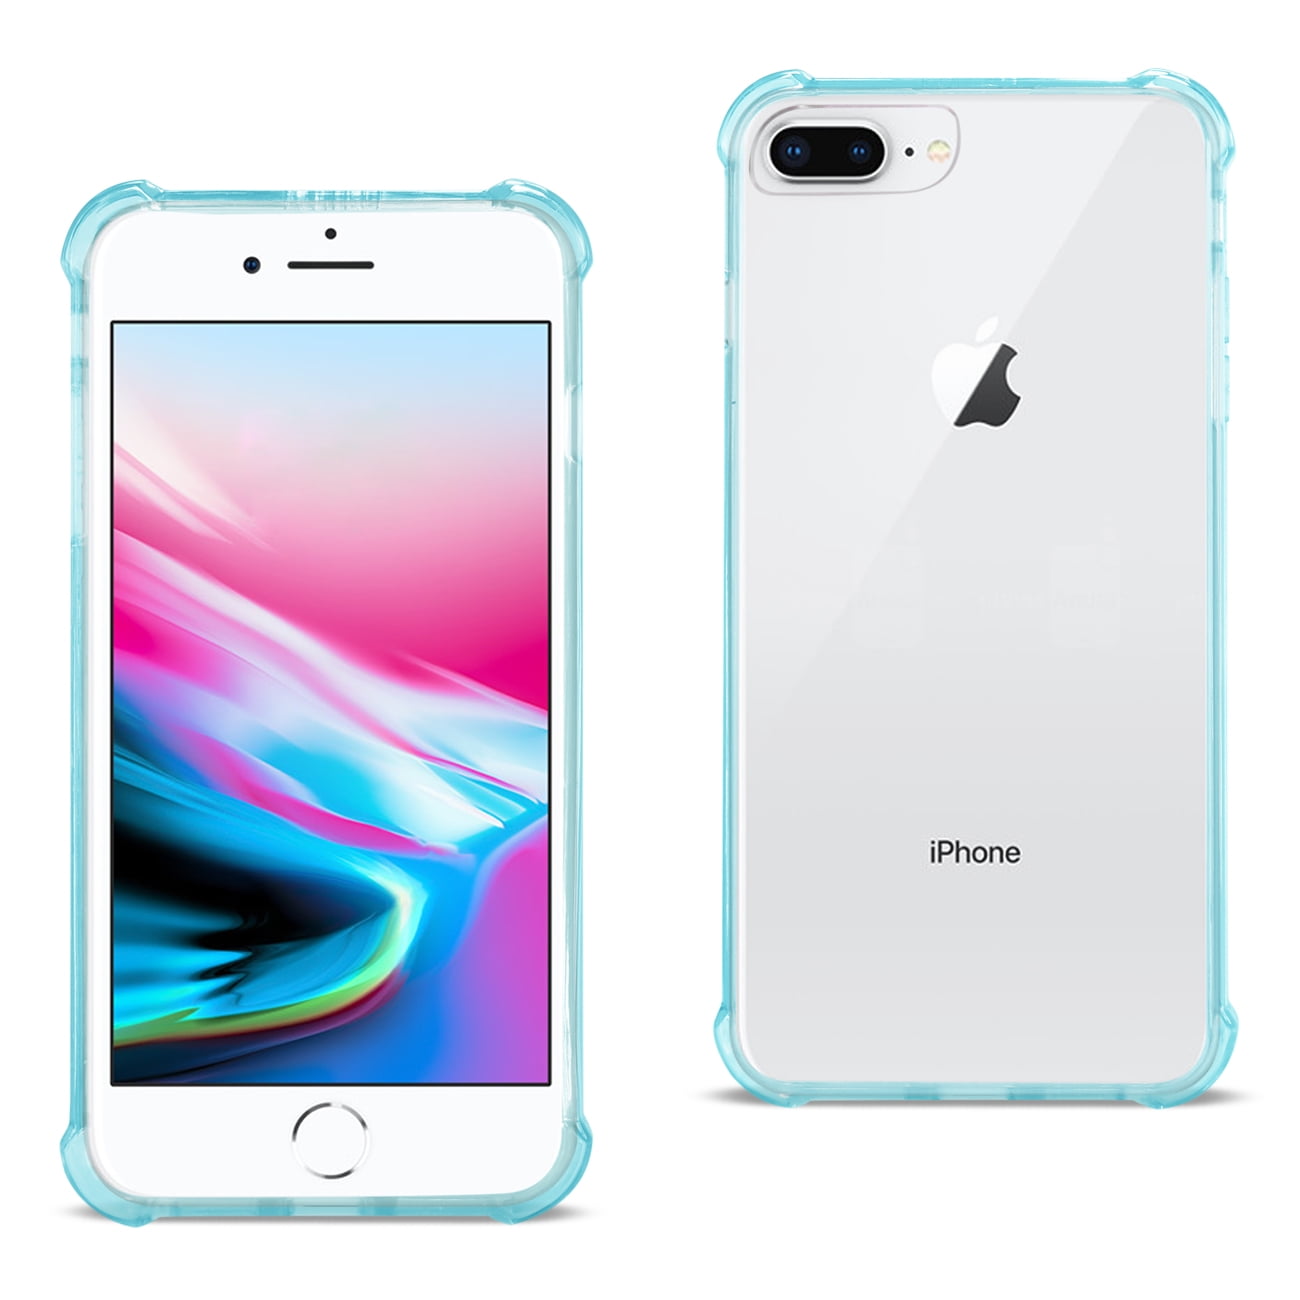 Verslaggever segment Verdrag Iphone 8 Plus Clear Bumper Case With Air Cushion Protection In Clear Navy -  Walmart.com